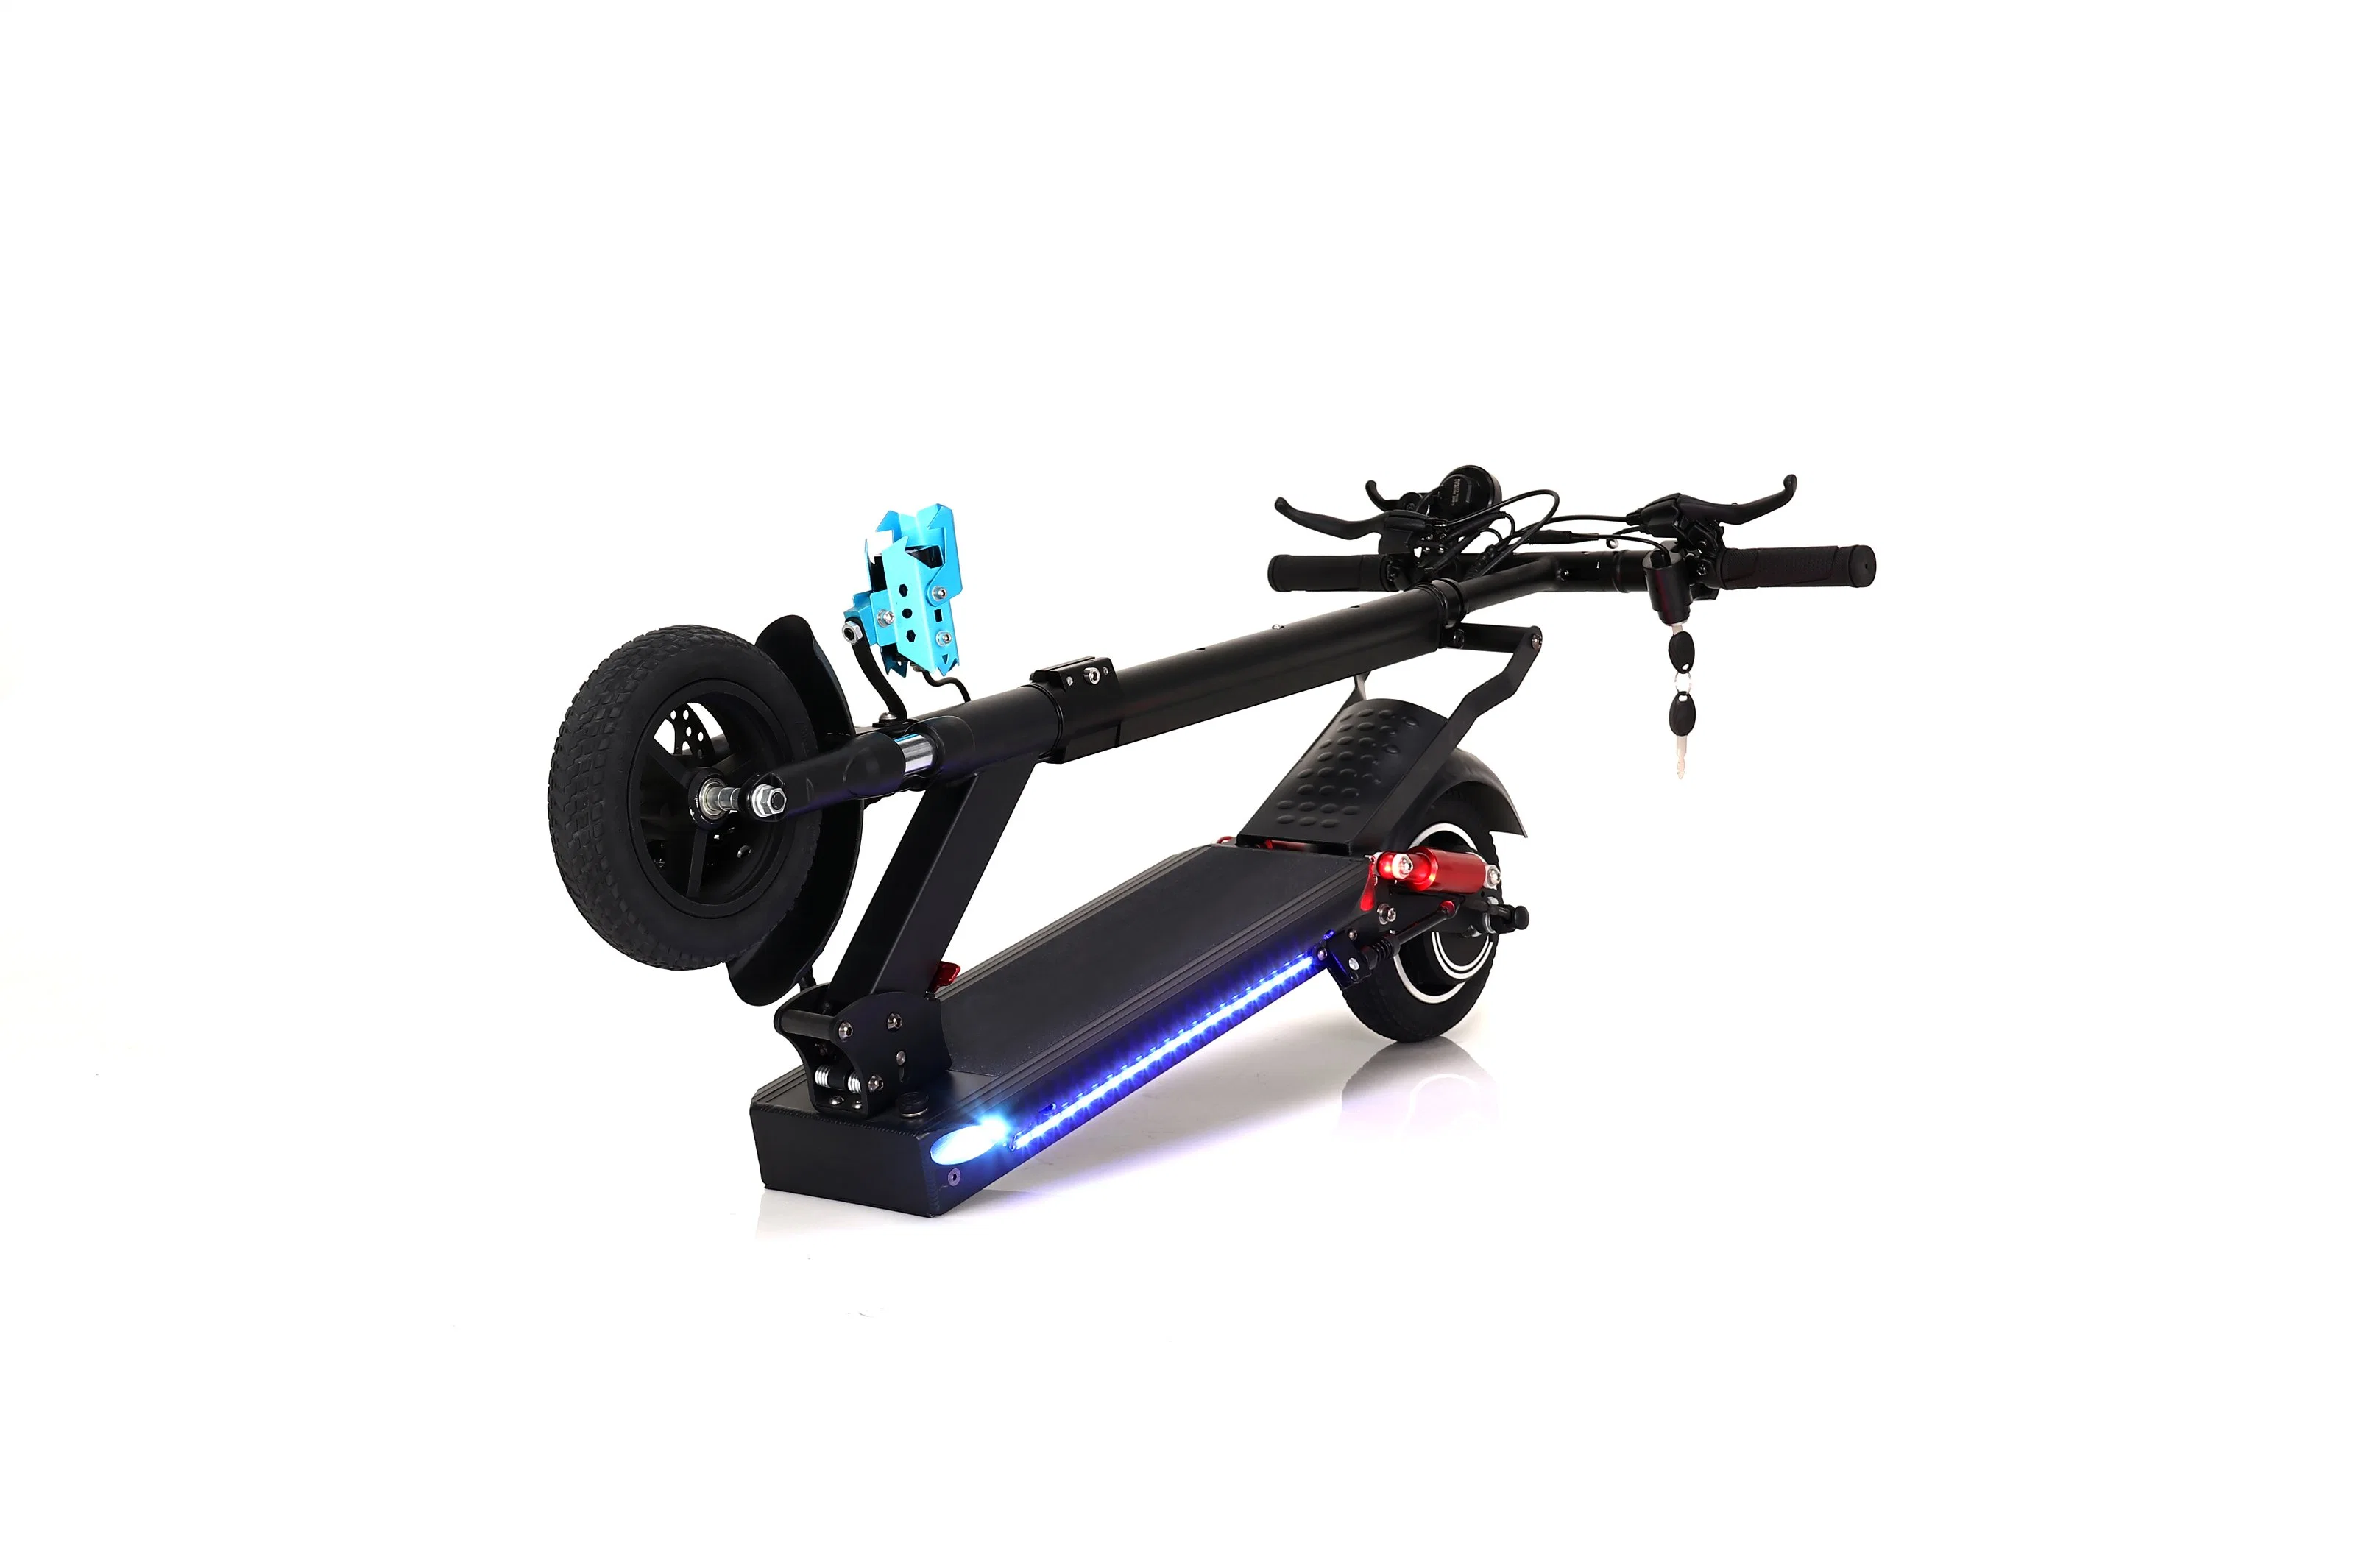 10inch Motorcycle Electric Scooter Bicycle Electric Bike Electric Motorcycle Scooter Motor Scooter Mobility Scooter Adult Scooters Folding Scooters Eks-37